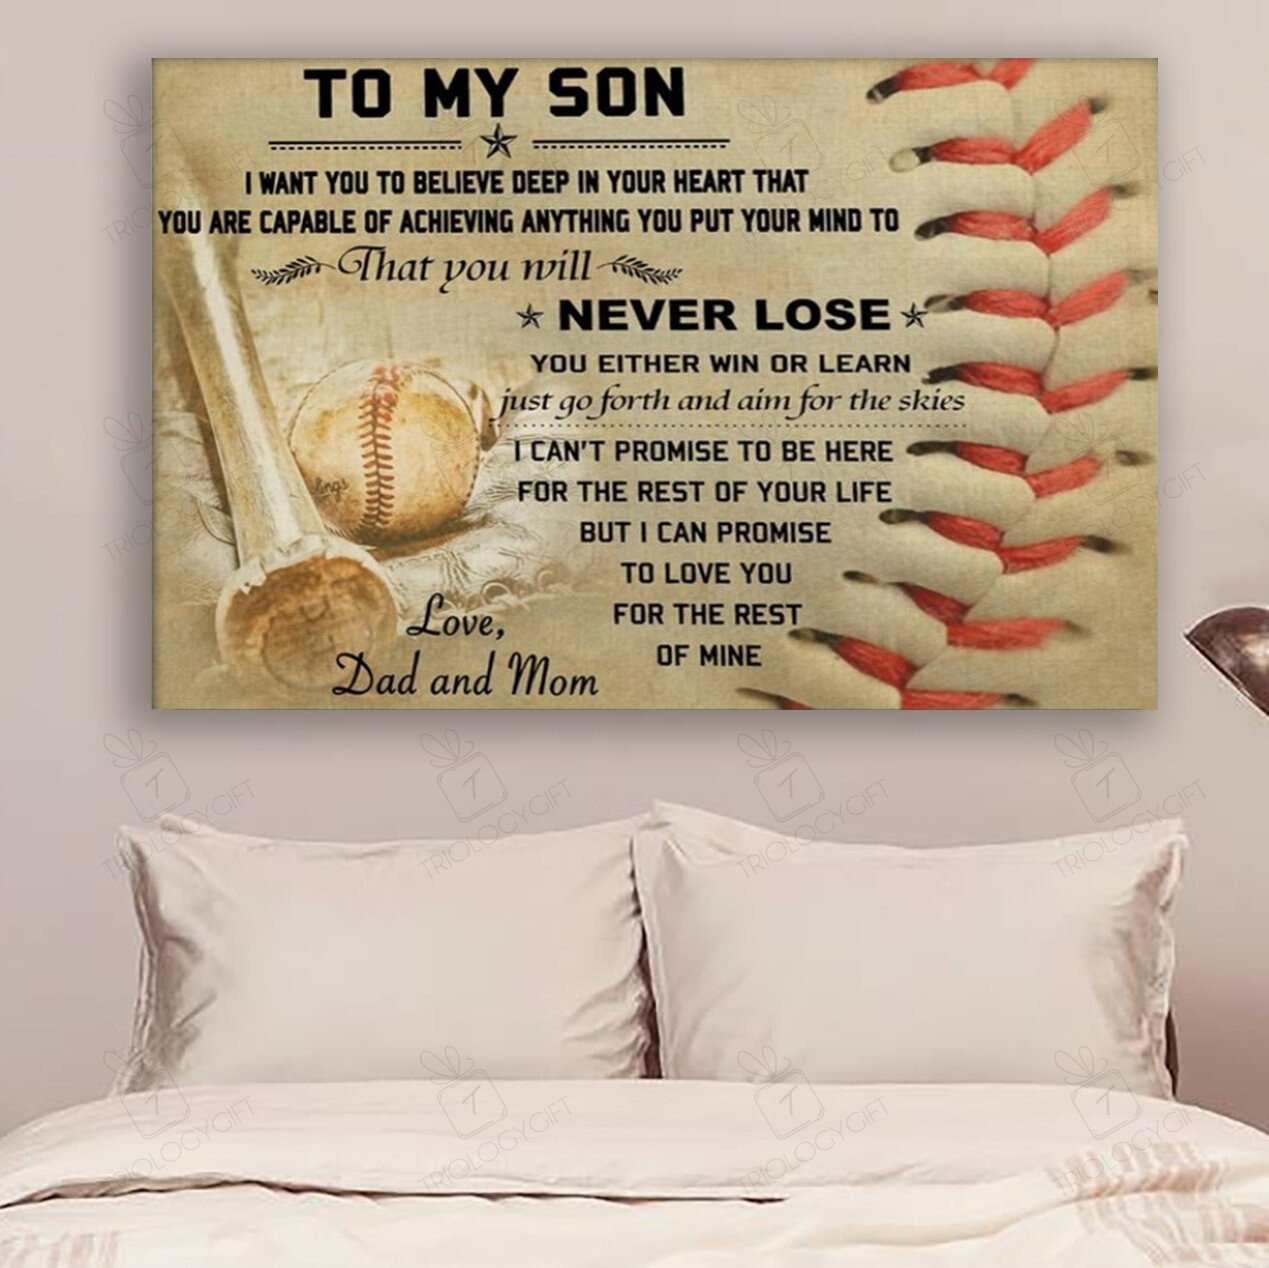 Th Baseball And To My Son Wall Decor Visual Art Poster 18x12in